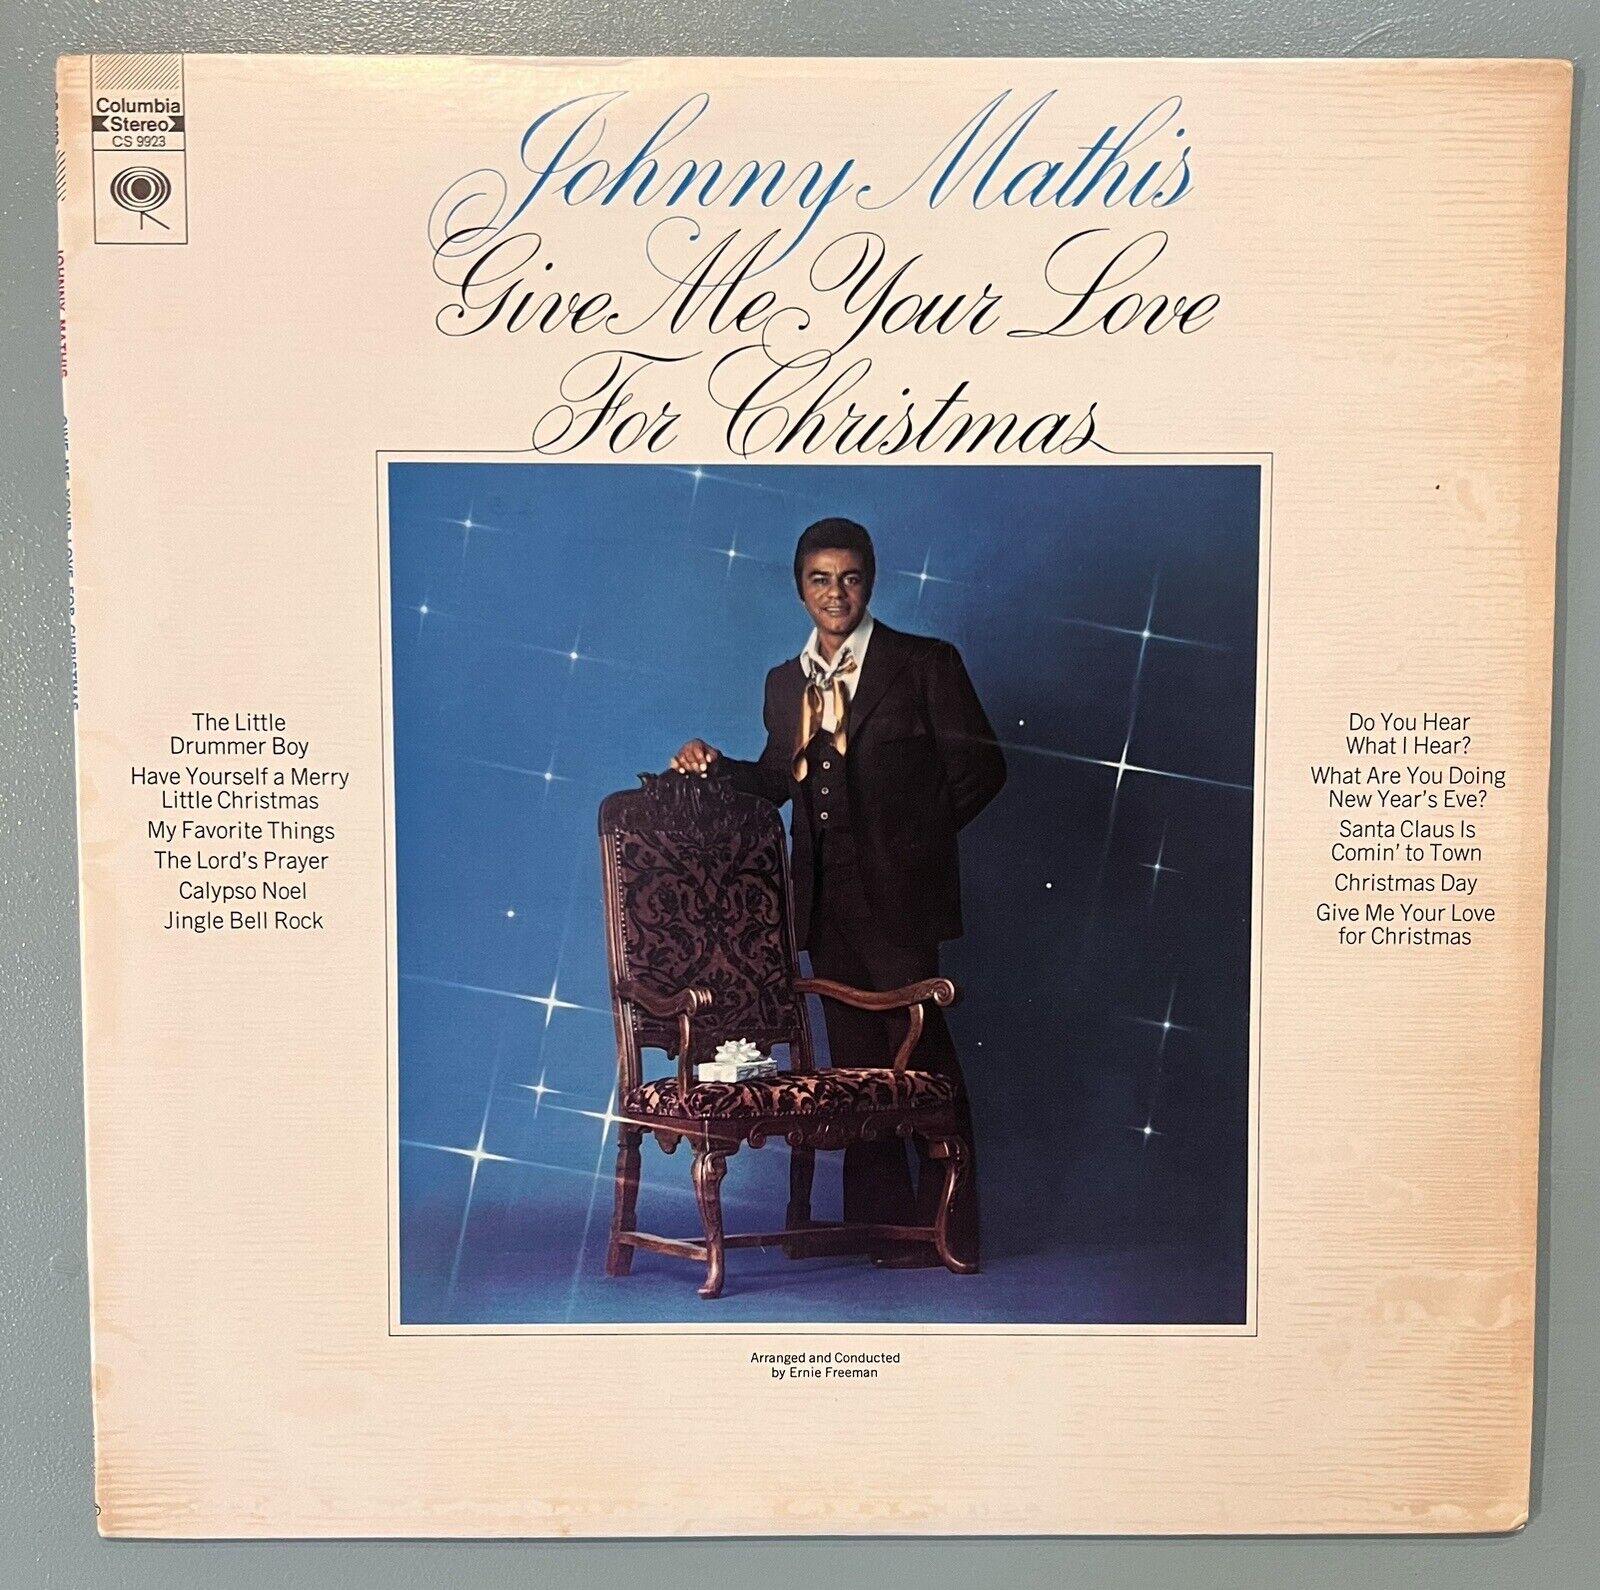 Johnny Mathis - Give Me Your Love For Christmas - Vinyl Record LP CS 9923